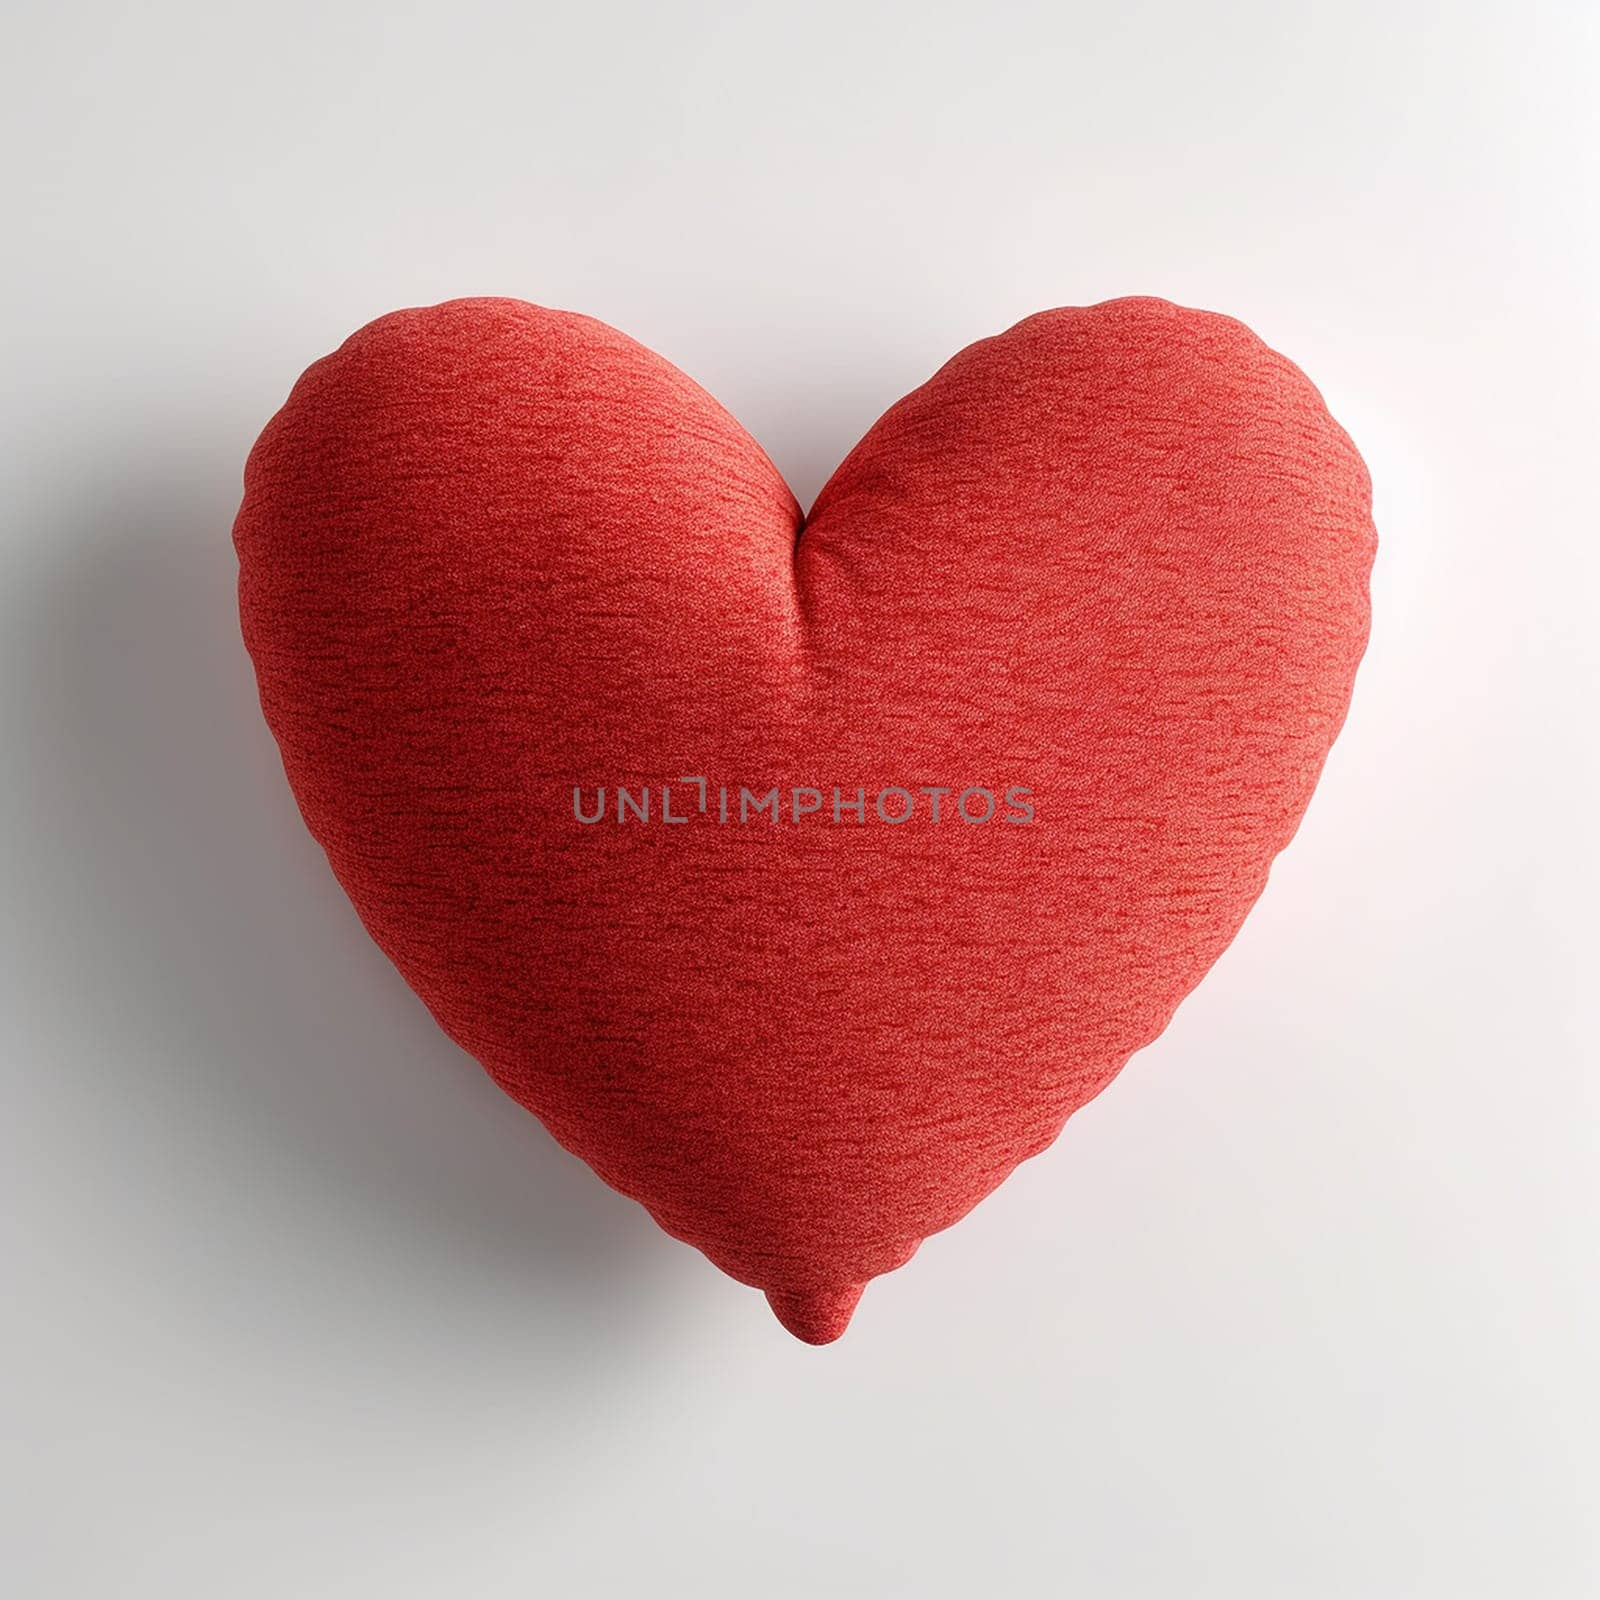 Red fabric heart shaped pillow on white background. by Hype2art